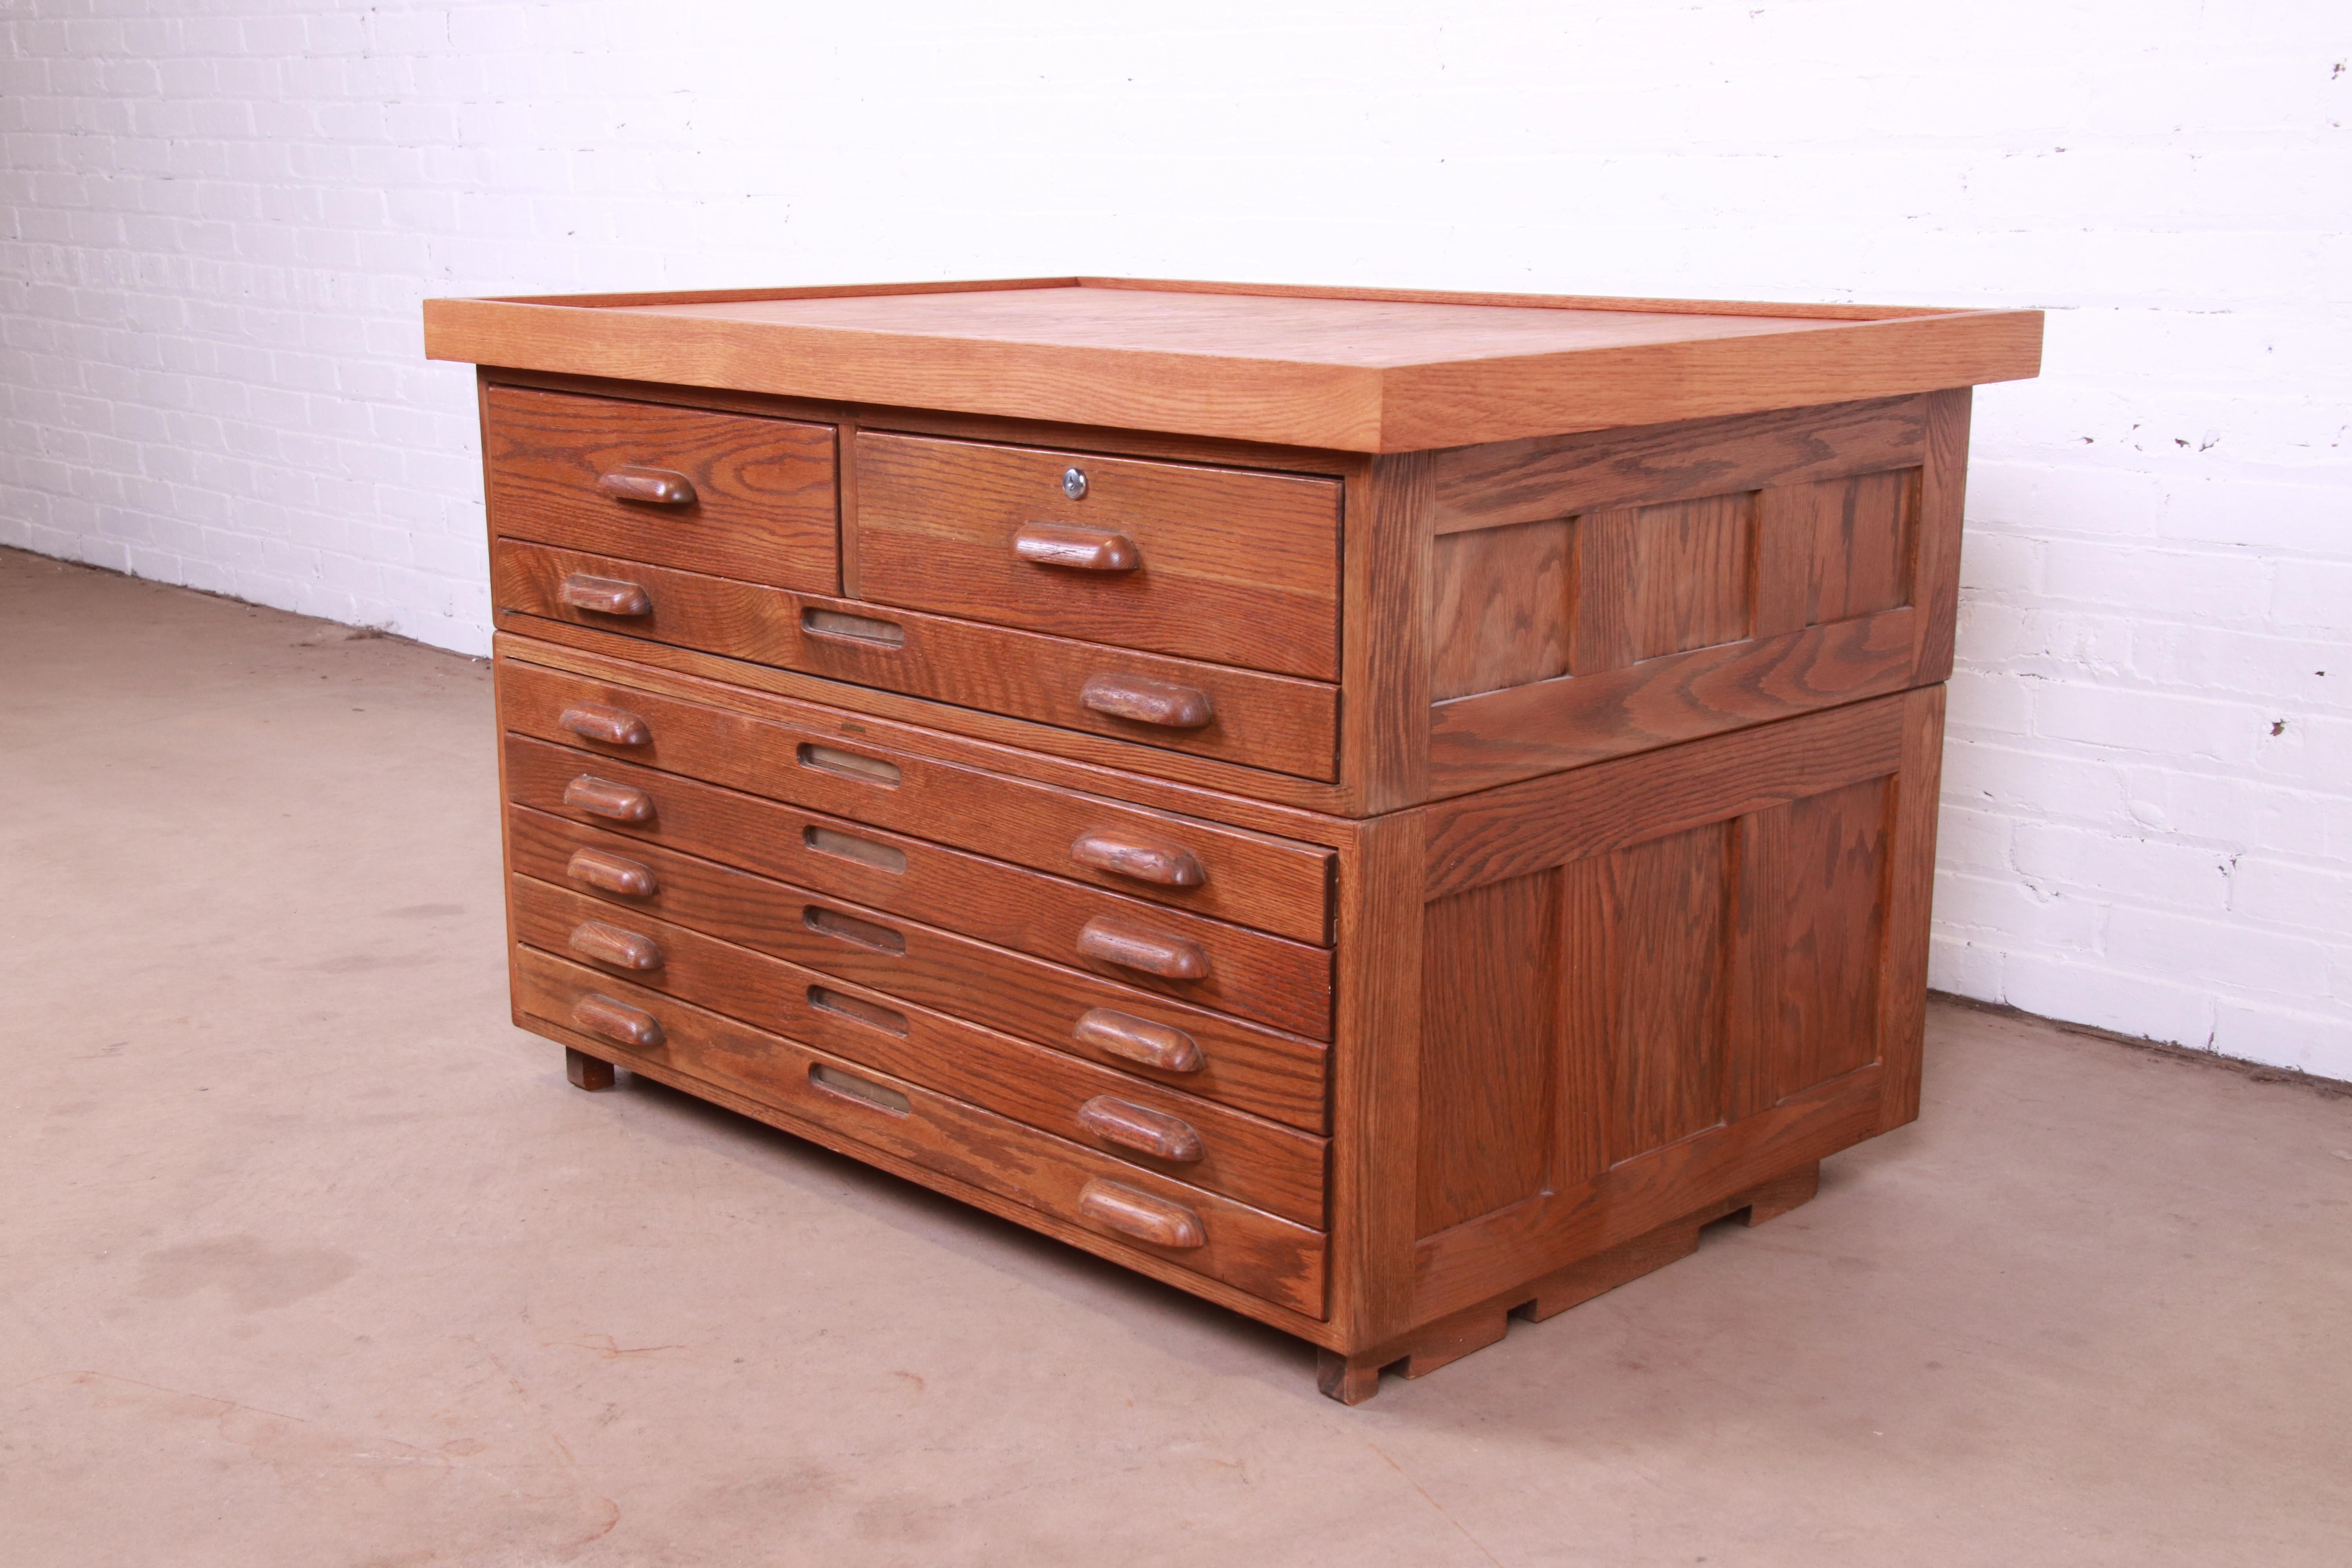 An exceptional Arts & Crafts style oak architect's blueprint or map flat file cabinet

Recently procured from Frank Lloyd Wright's DeRhodes House. We discovered the original blueprints for the house in this cabinet, hand-drawn by Frank Lloyd